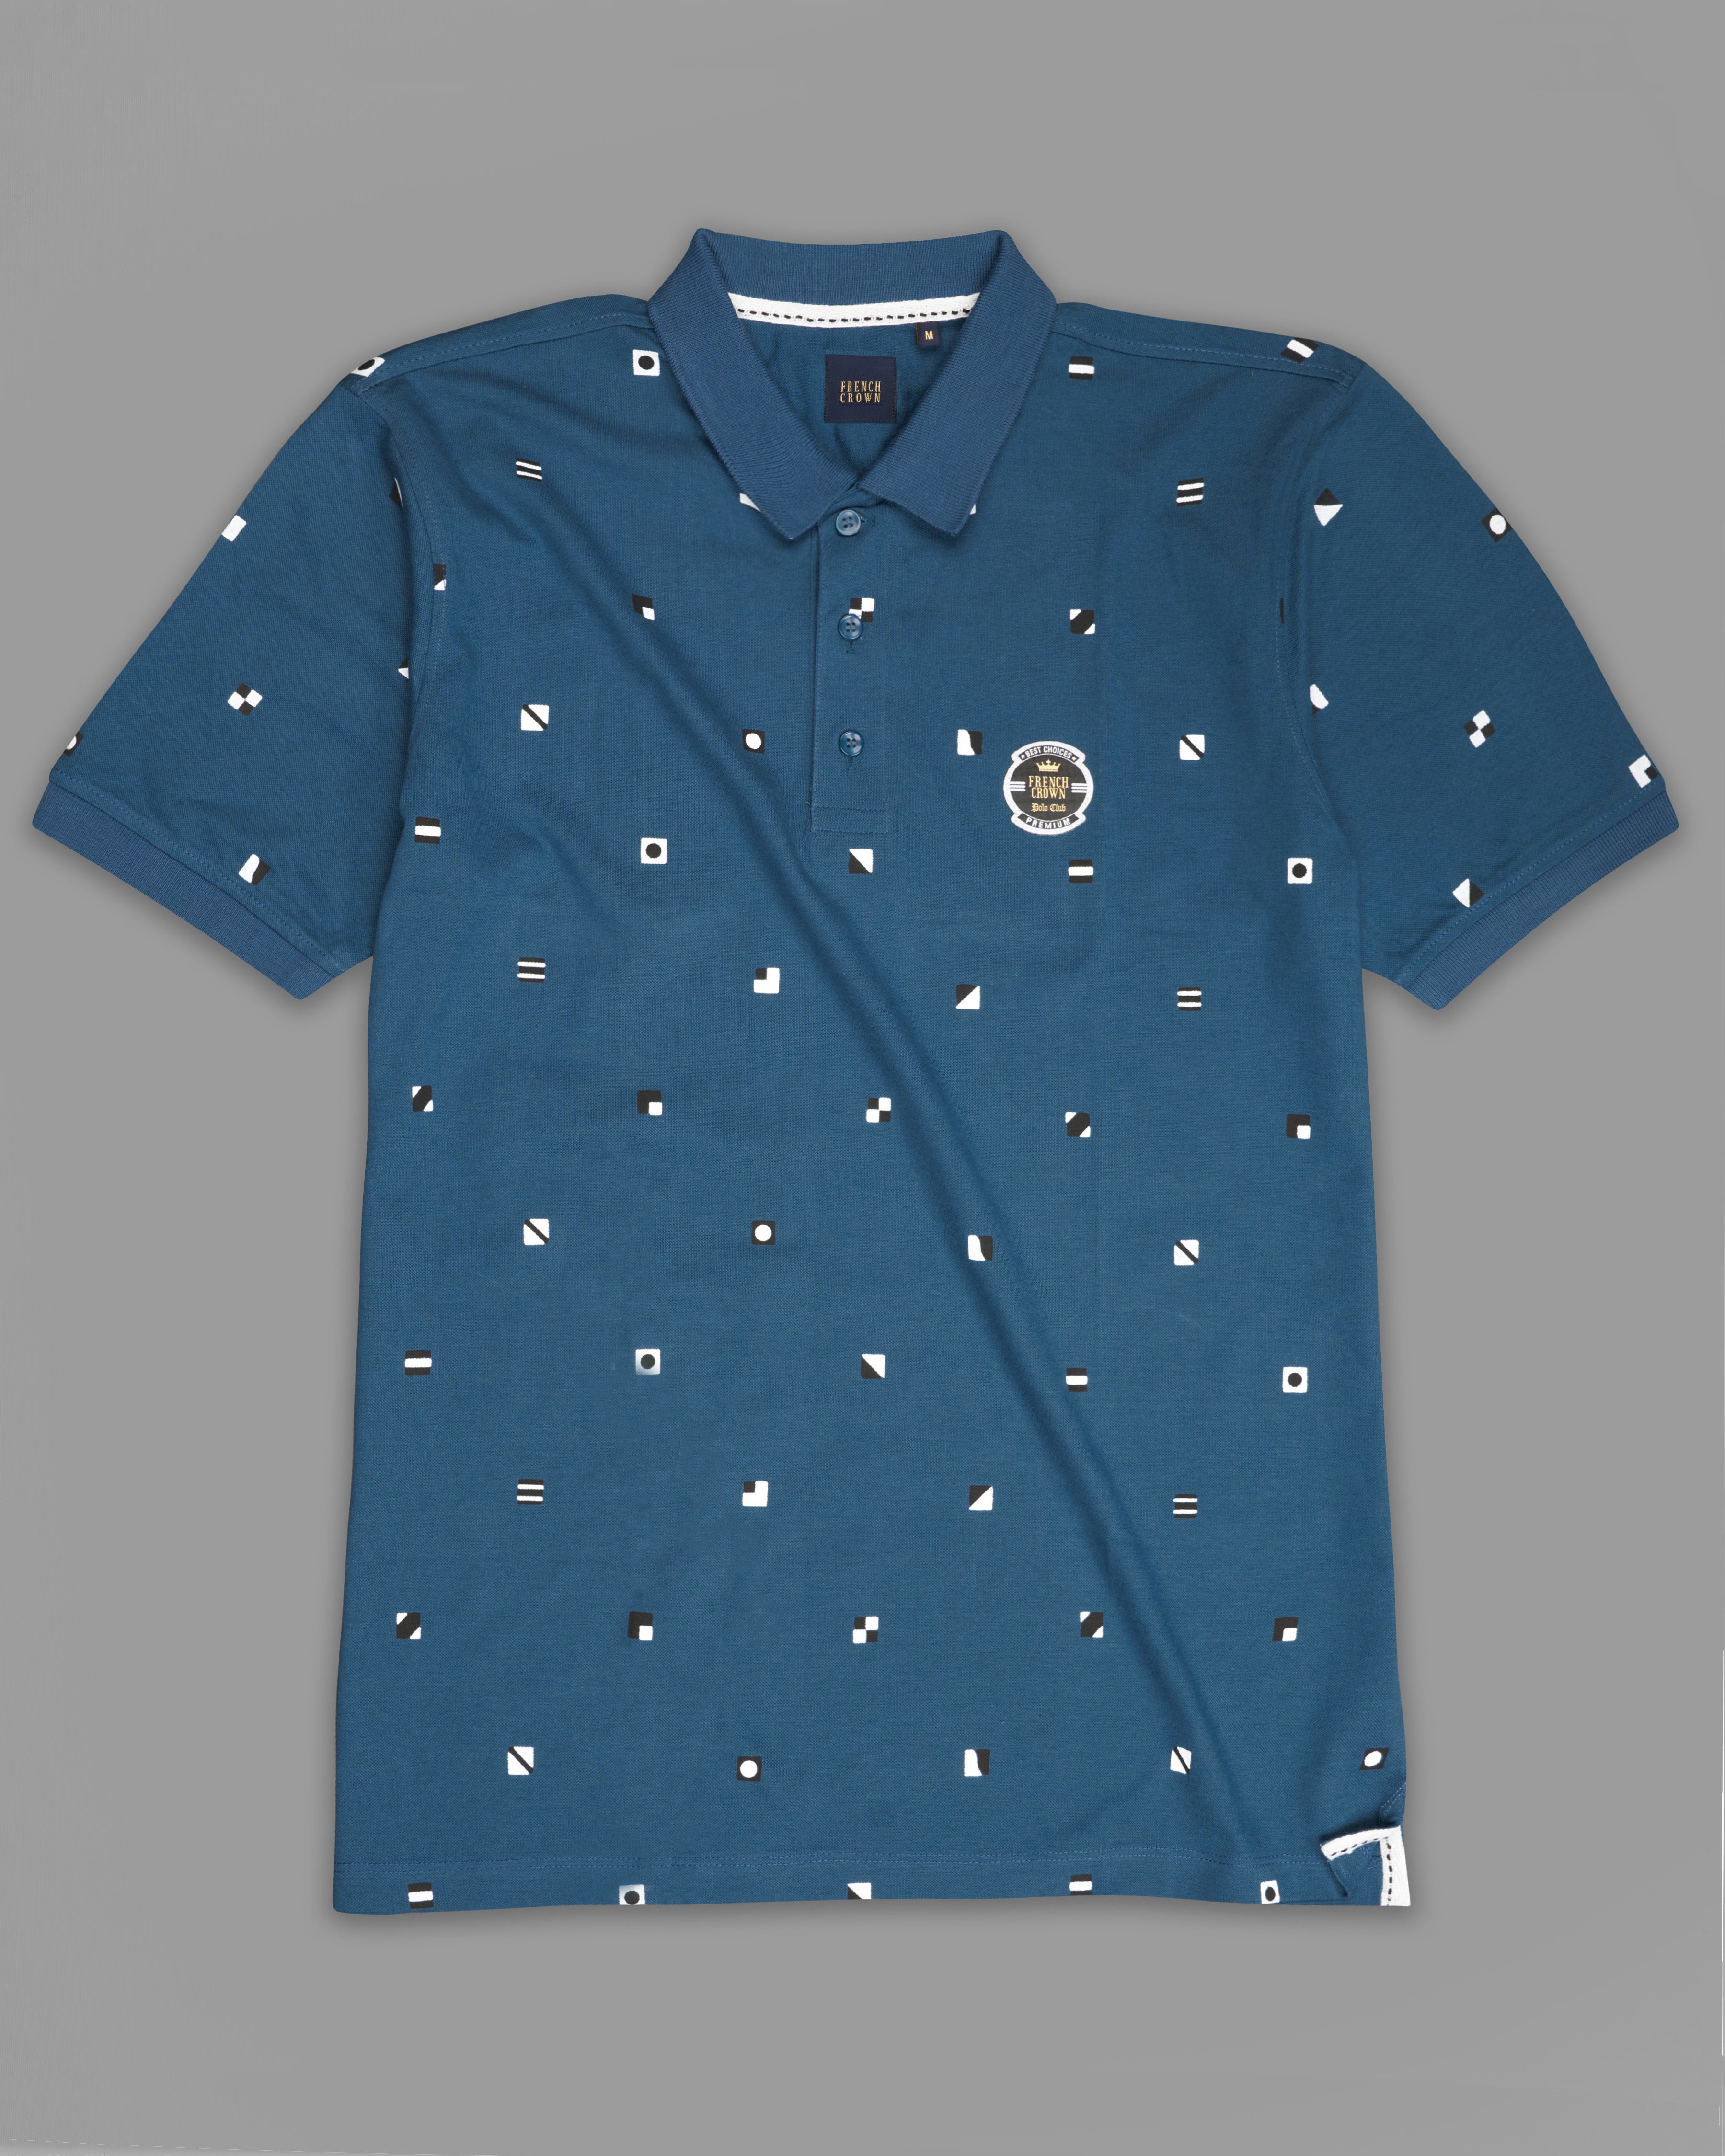 Rhino Blue with Black and White Textured Organic Cotton Pique Polo TS846-S, TS846-M, TS846-L, TS846-XL, TS846-XXL